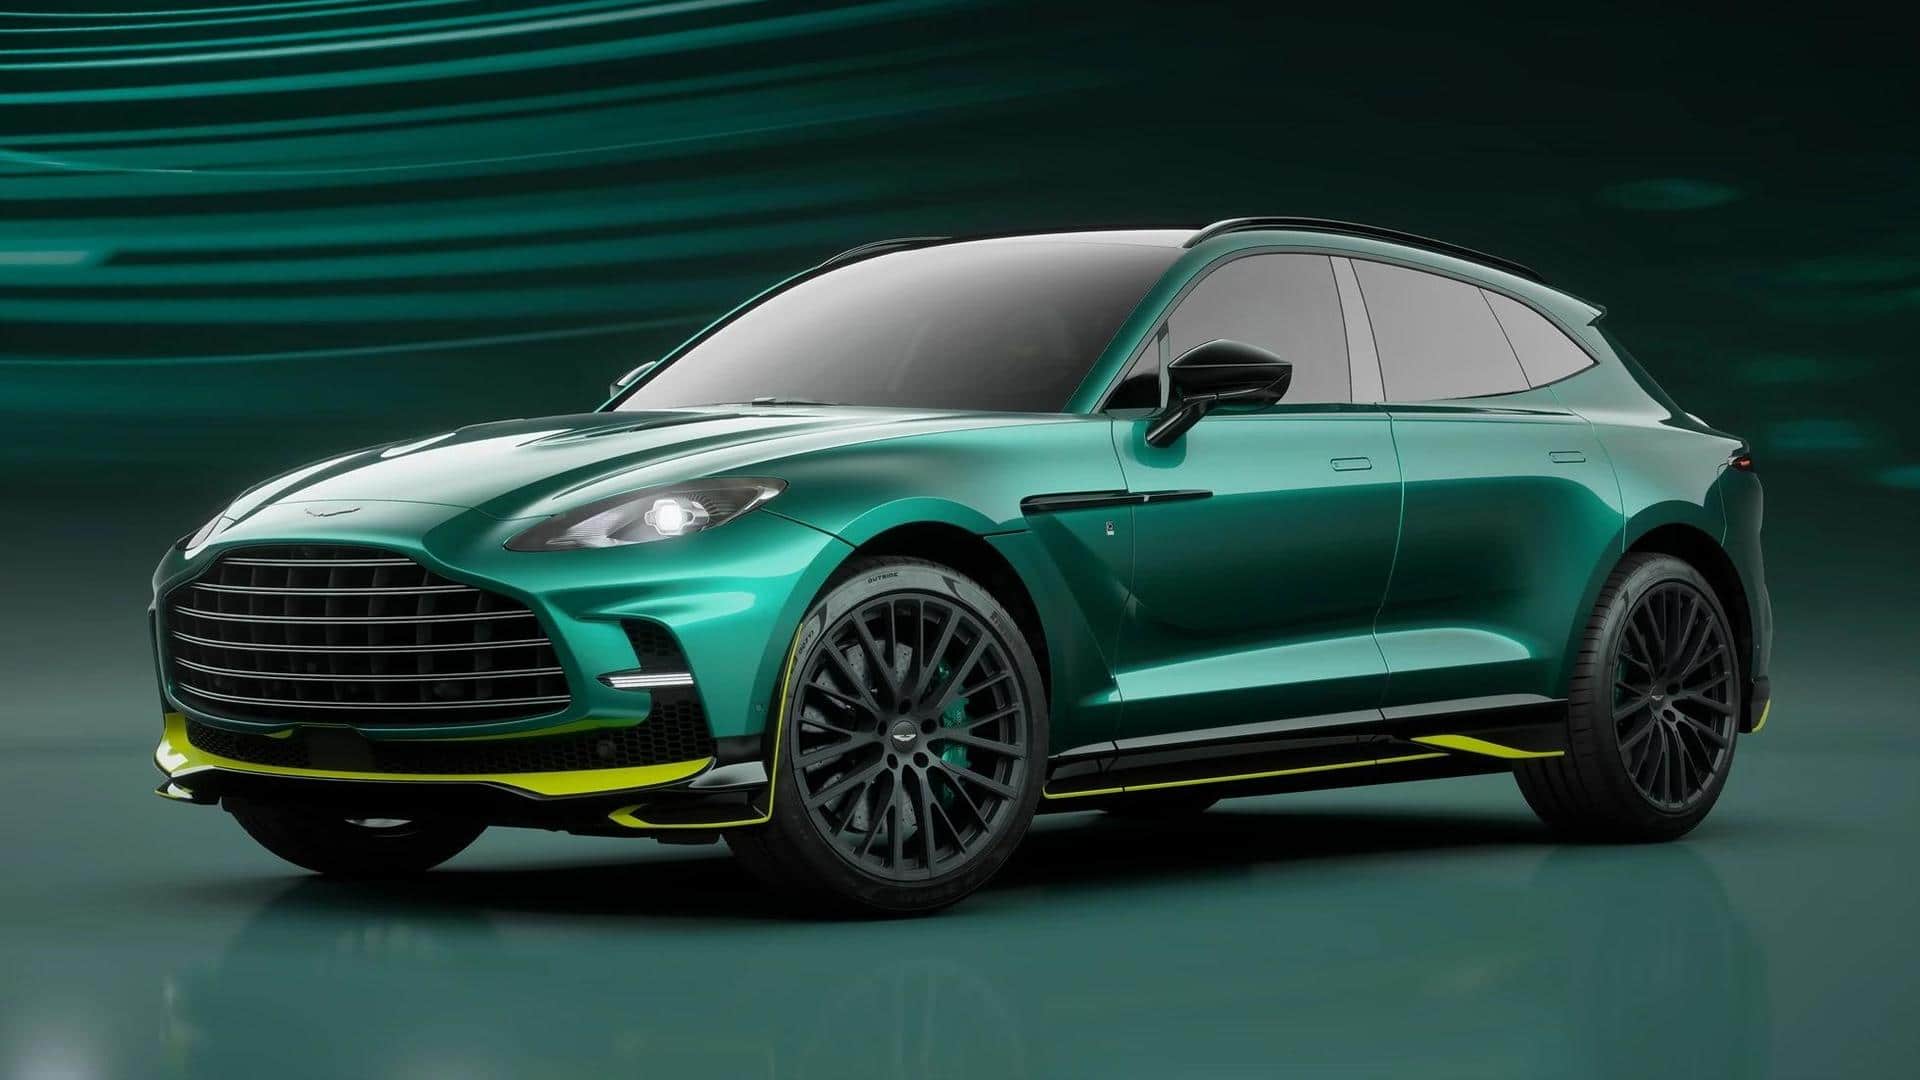 Aston Martin DBX707 AMR23 Edition breaks cover: Check best features